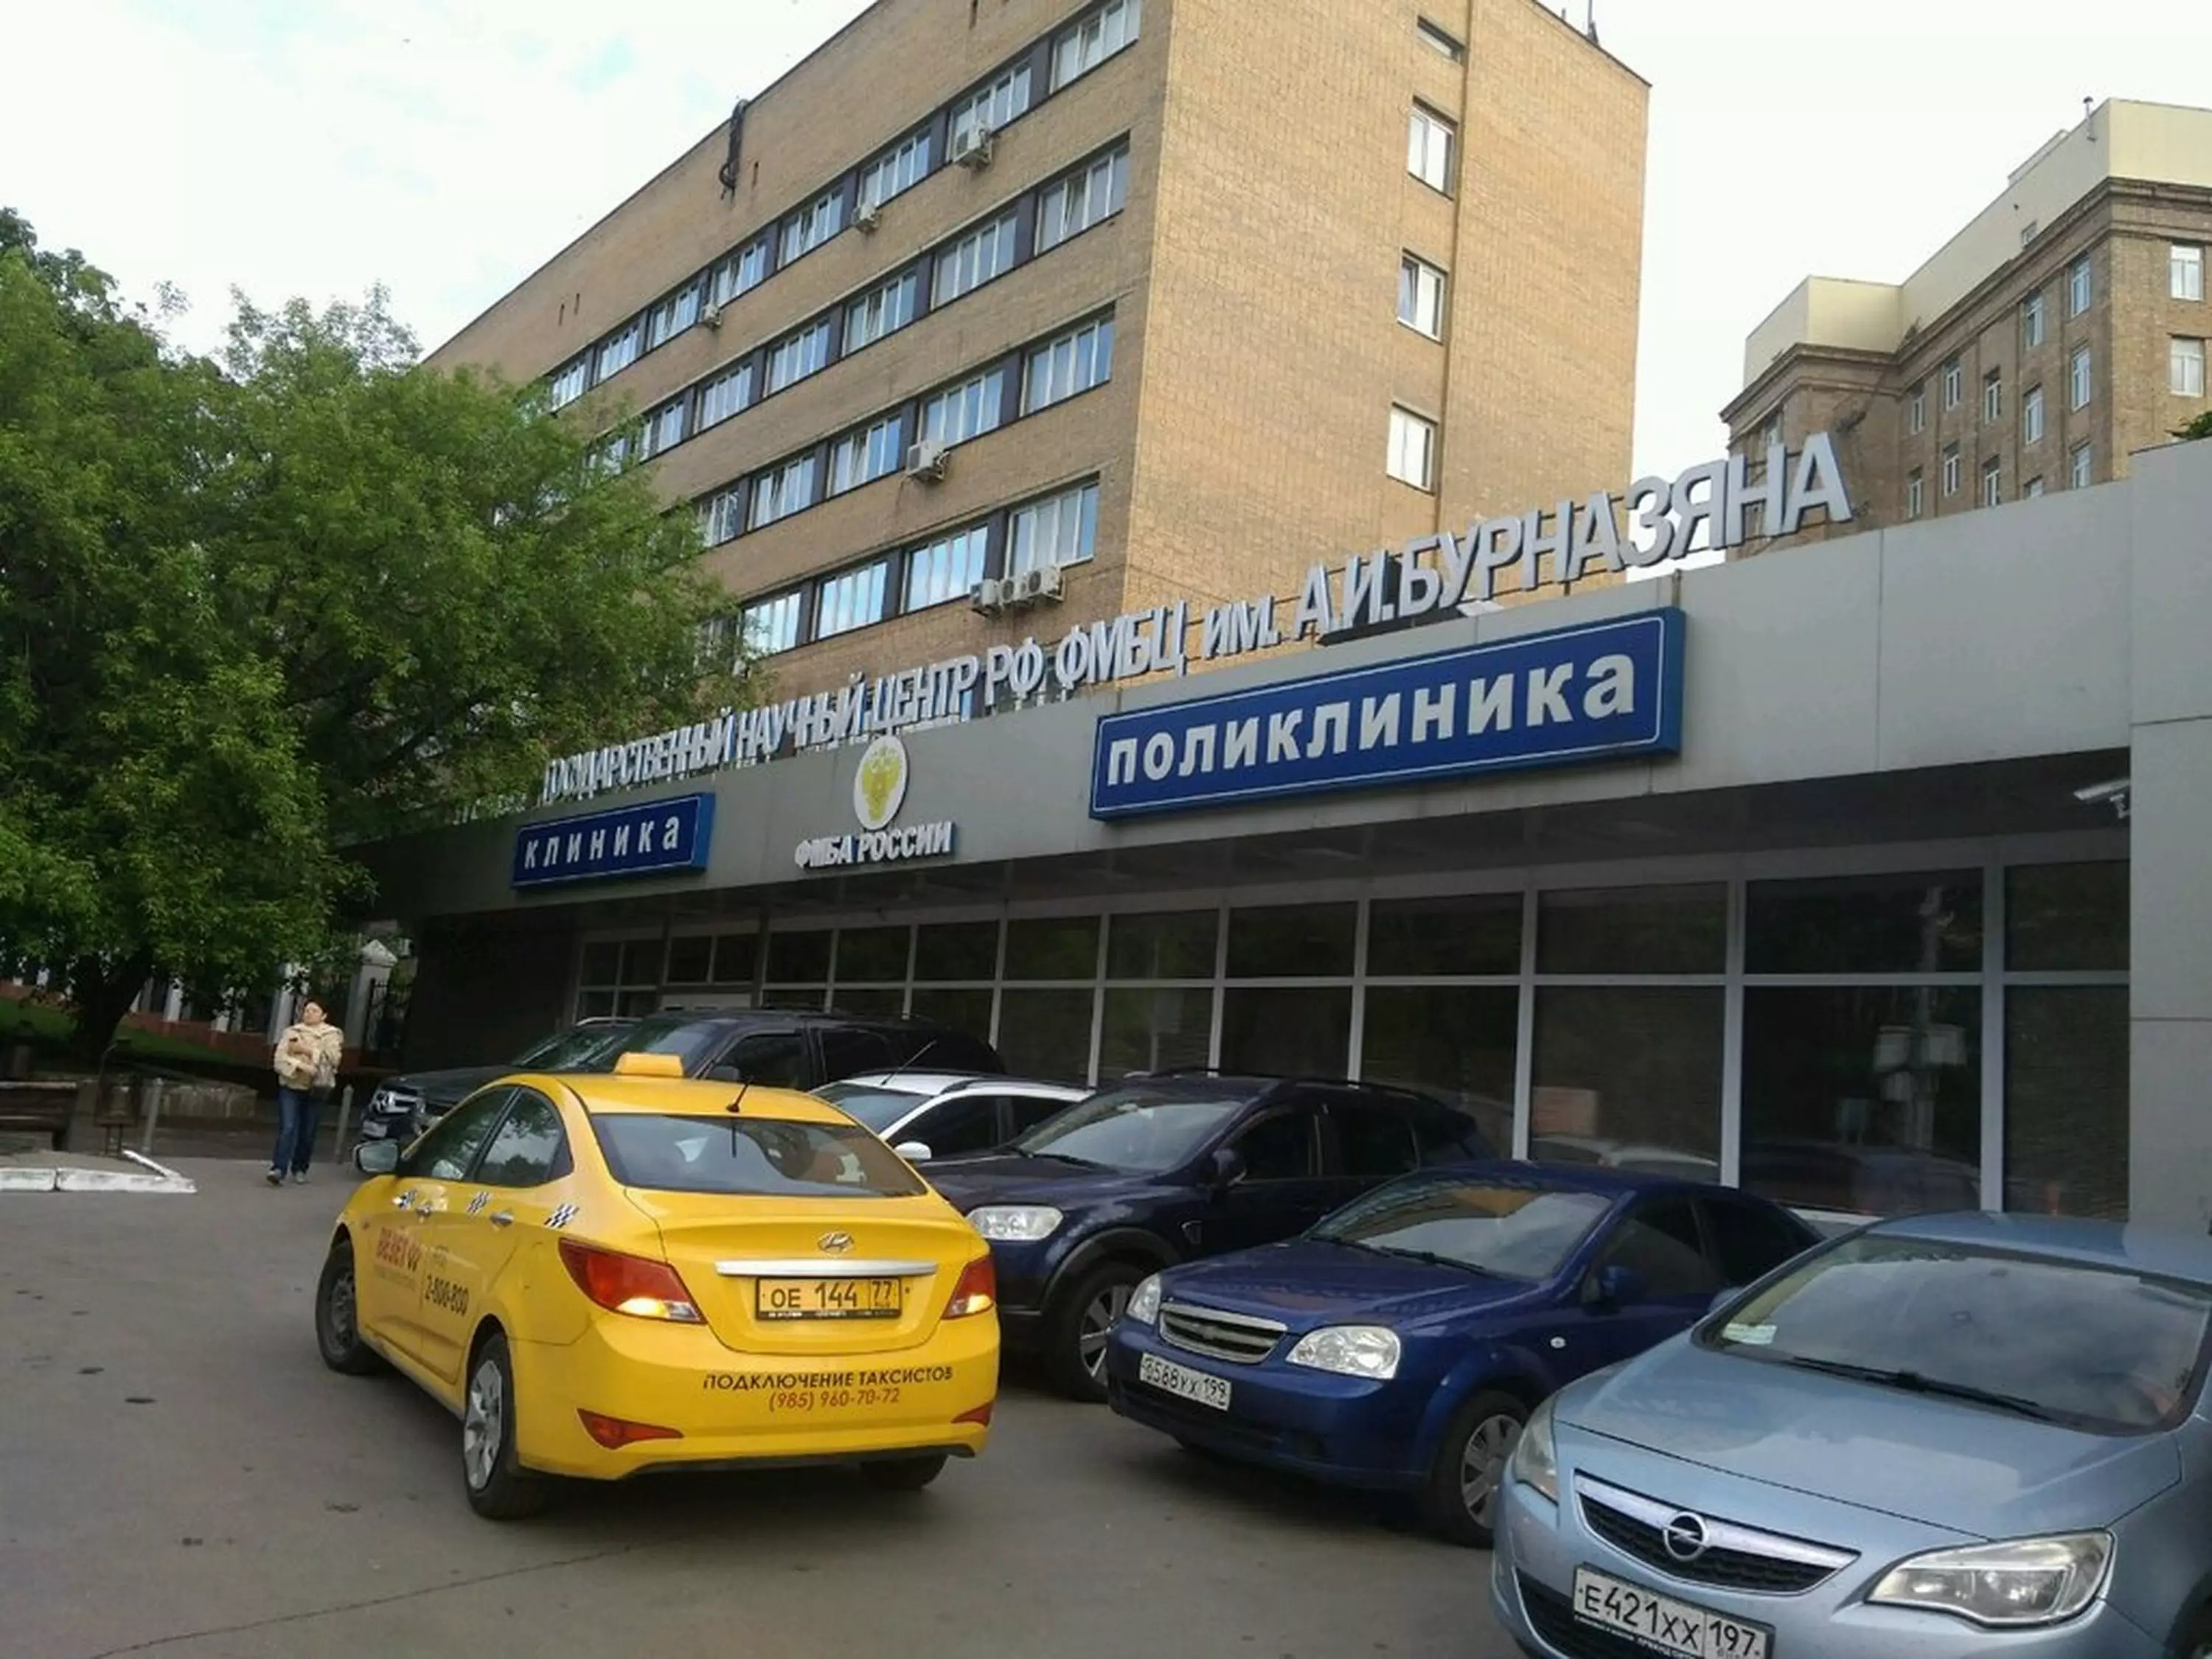 The Moscow hospital where the man was treated.